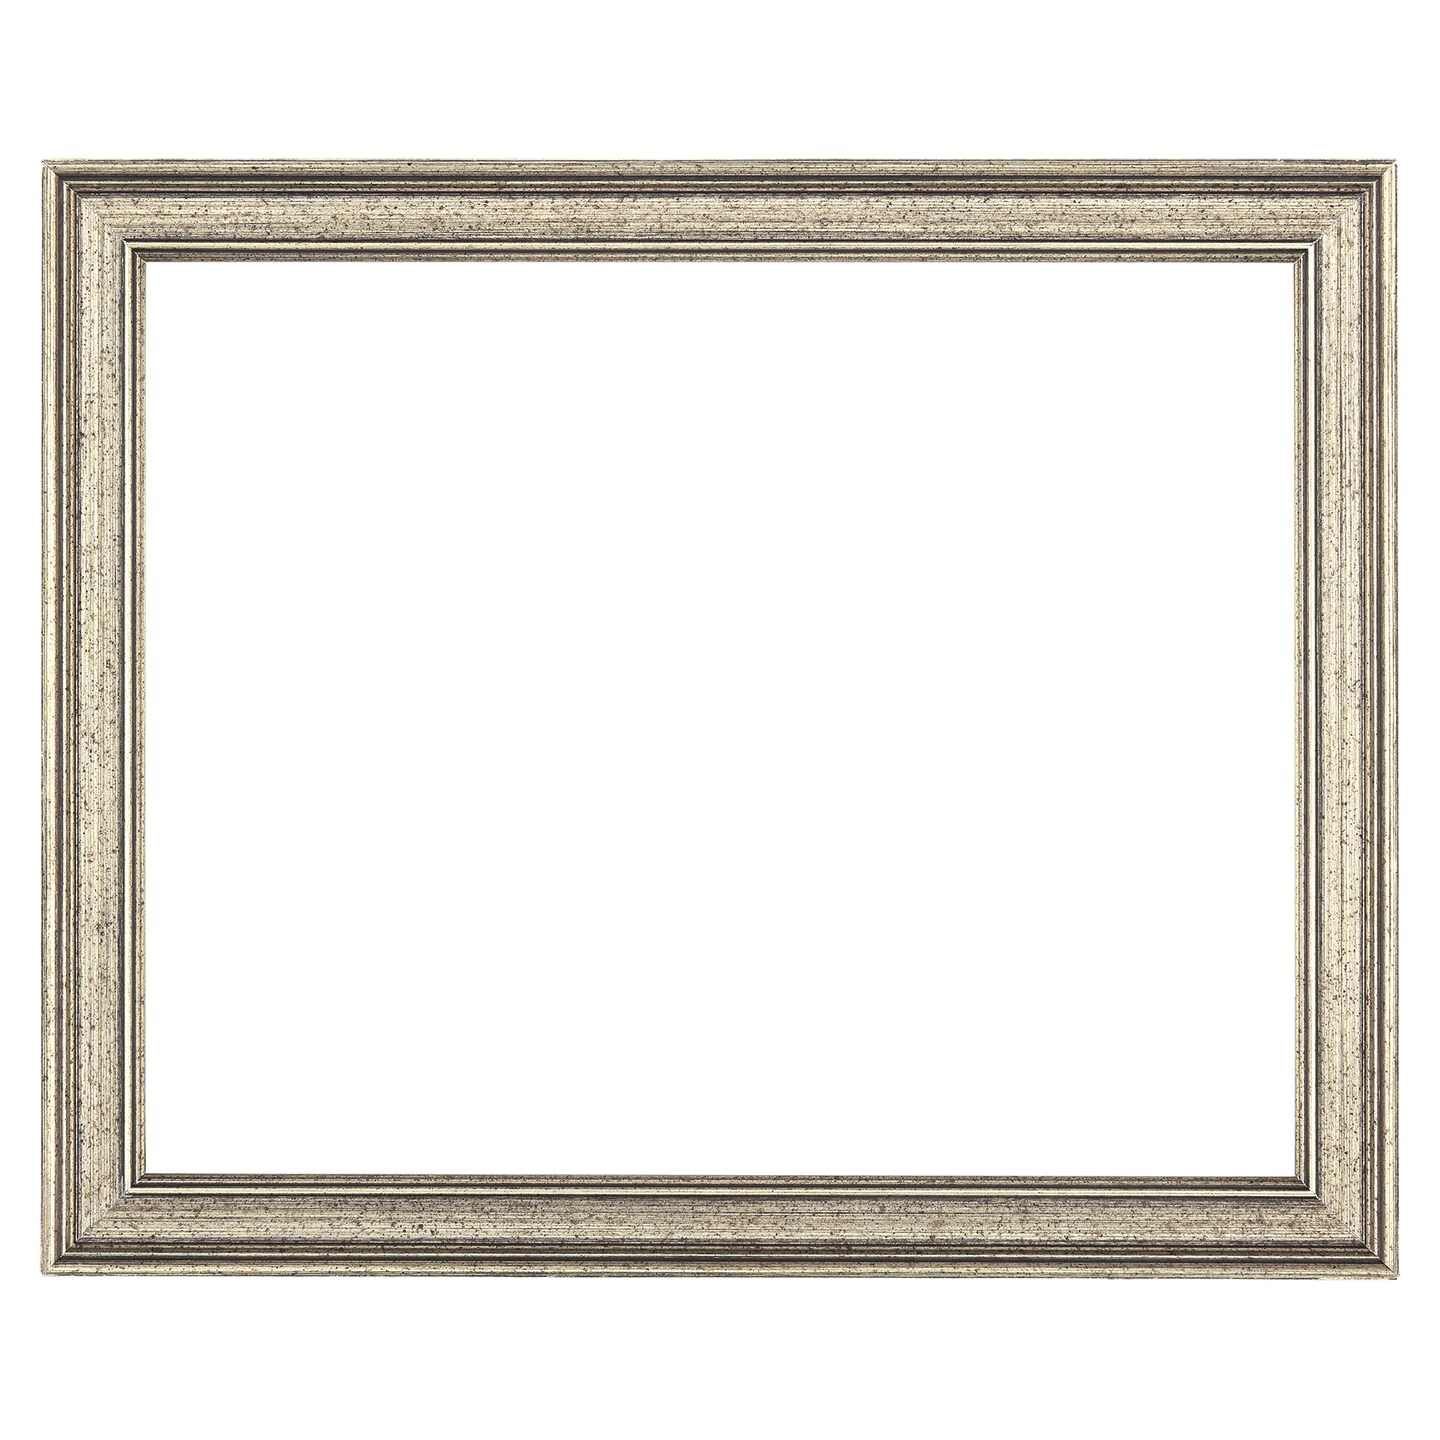 Museum Collection Piccadilly Artist Vintage Single Picture Frame for 3/4" Canvas, Paper and Panels, Museum Quality Wooden Antique Frame, does not include glass or backing